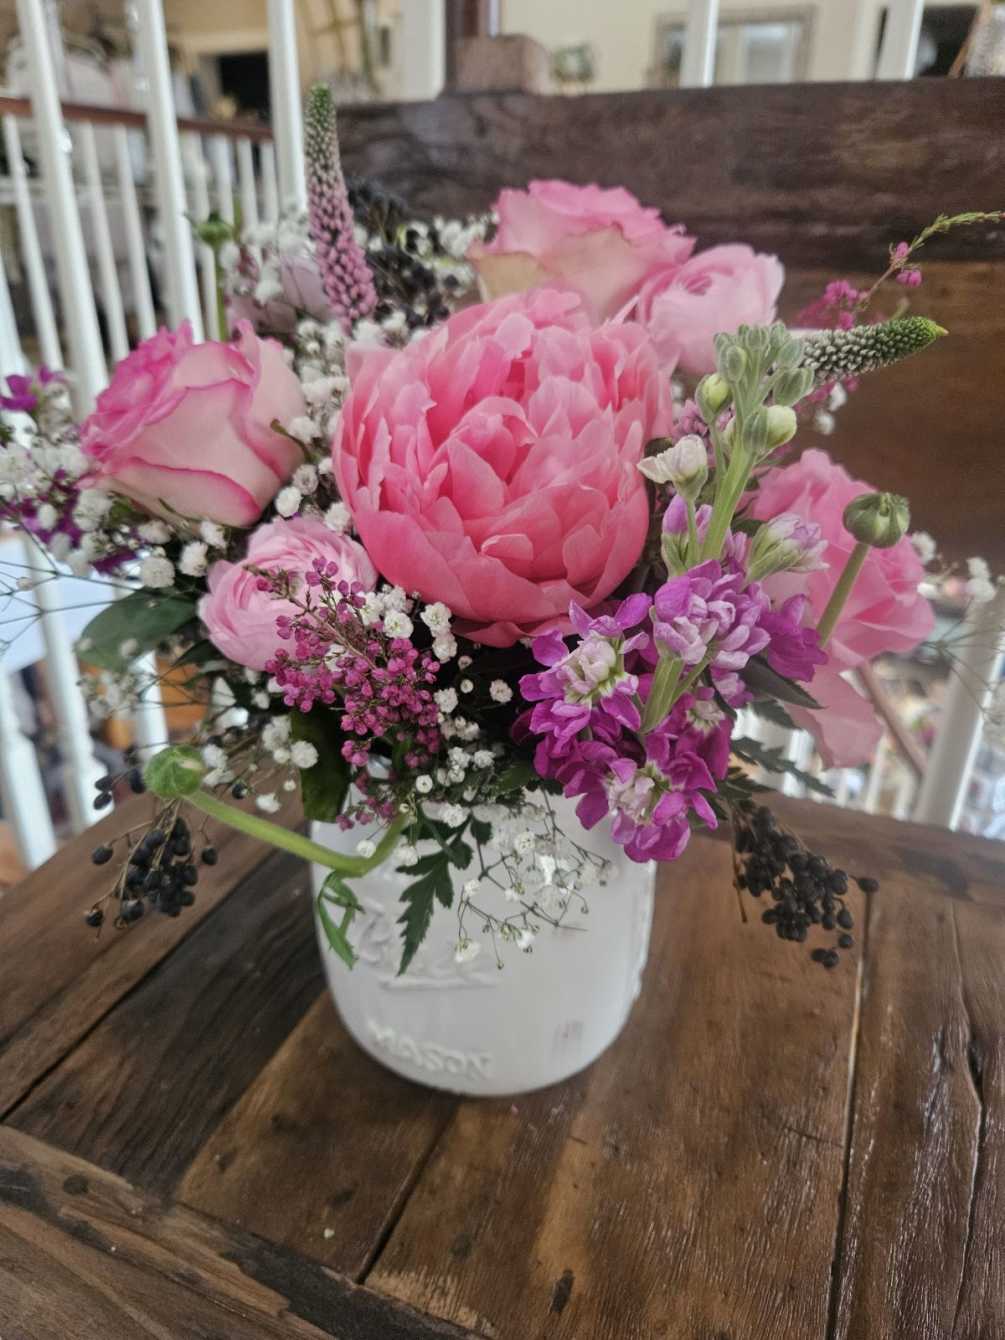 Pink Peonies with oink roses, pink ranunculus, stock and heather
arranged in an